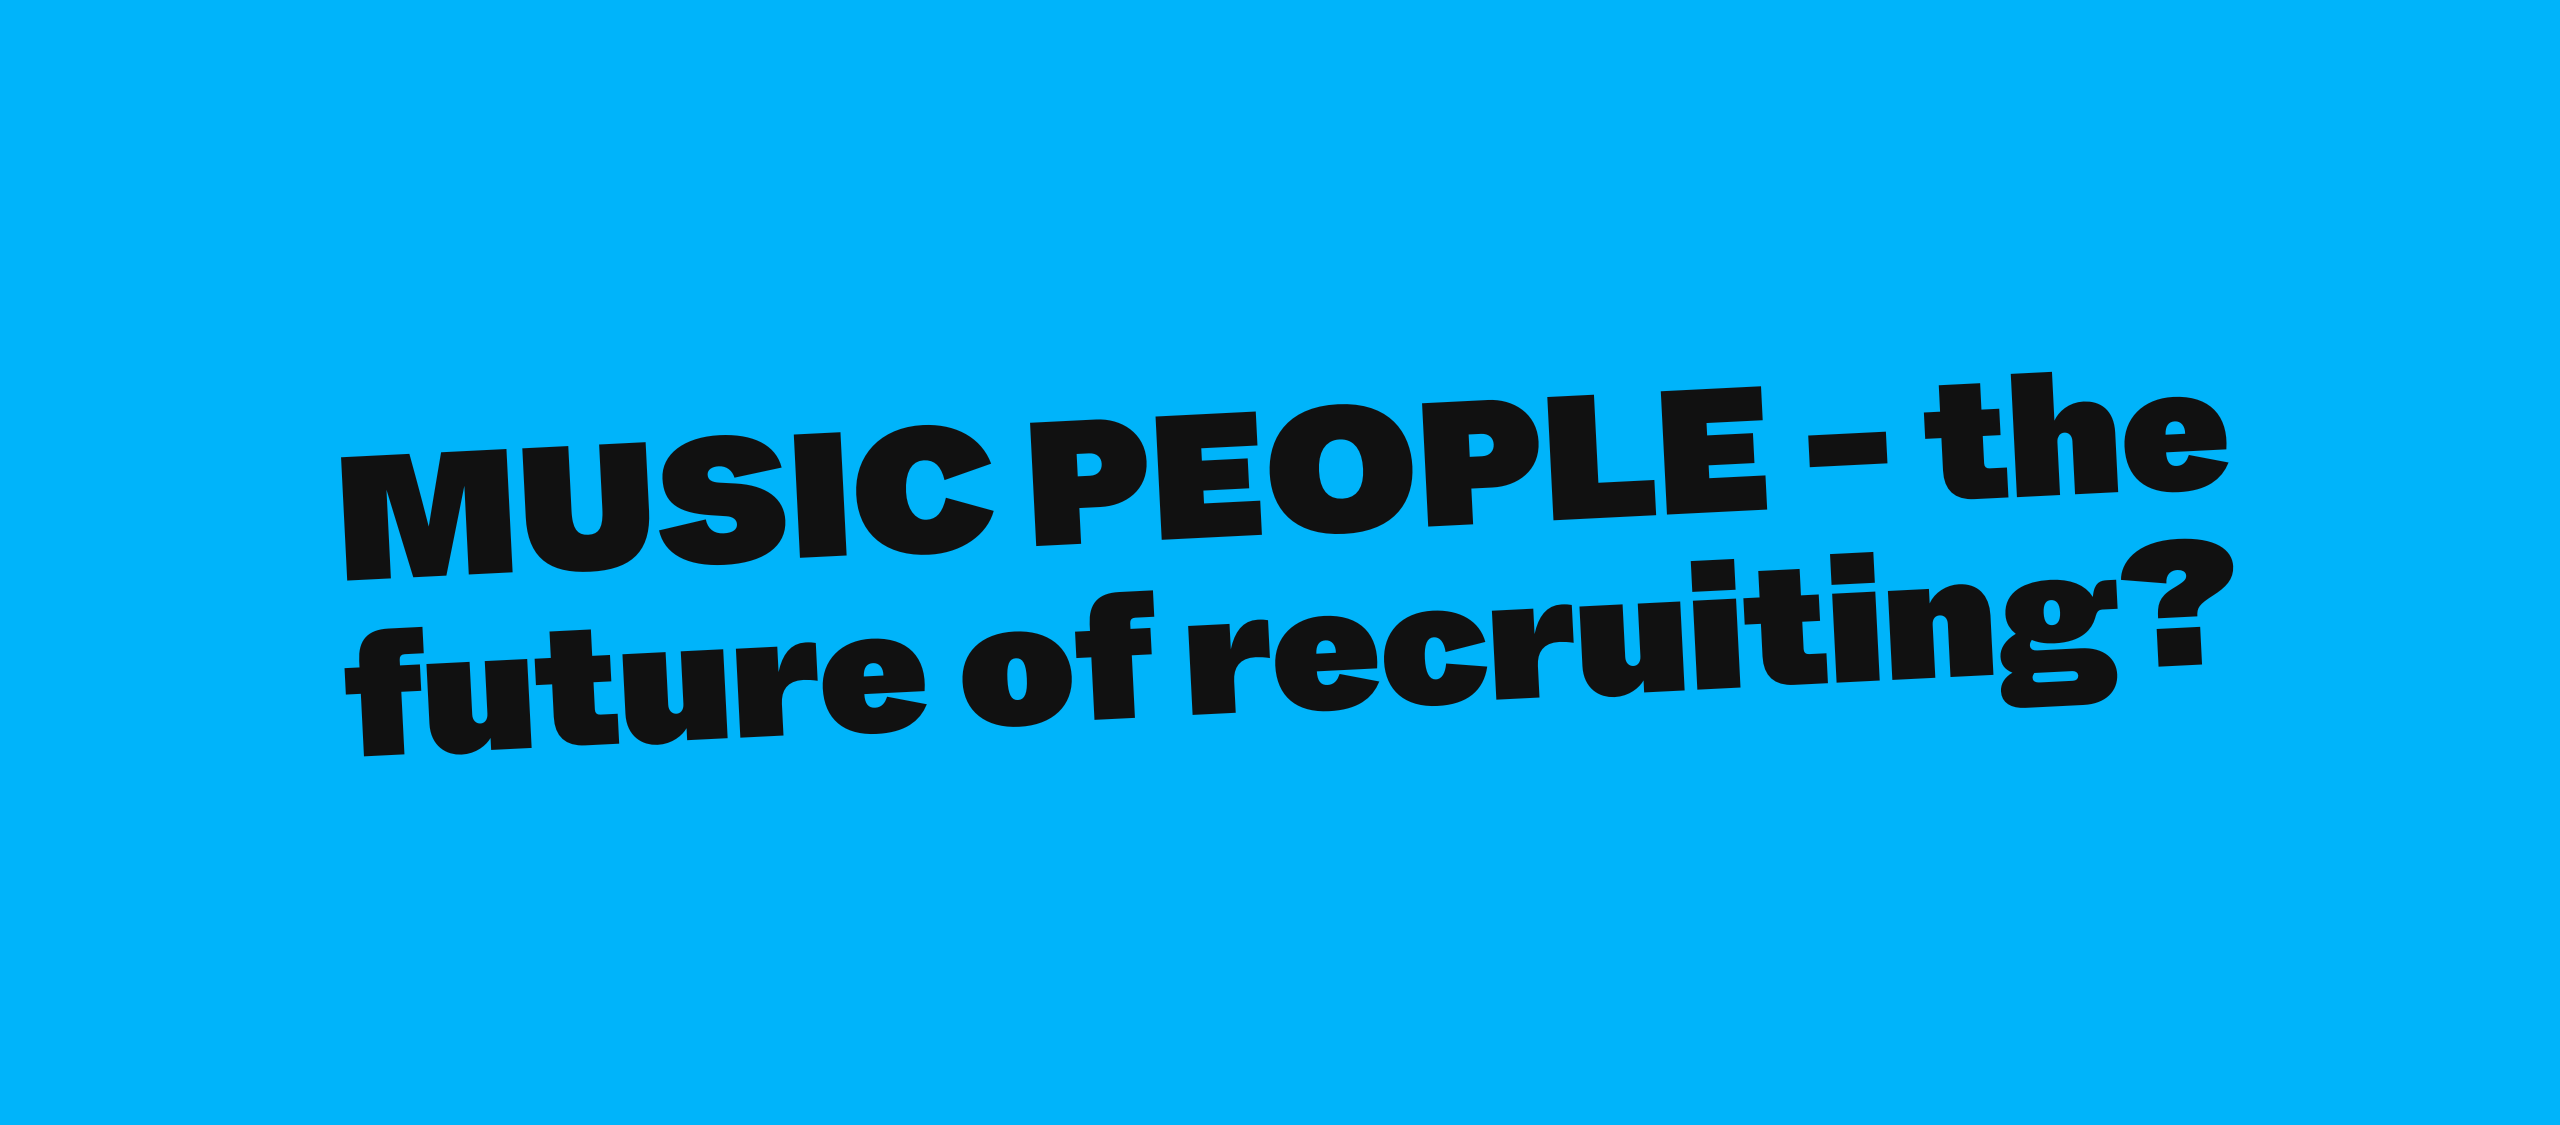 MUSIC PEOPLE - the future of recruiting?